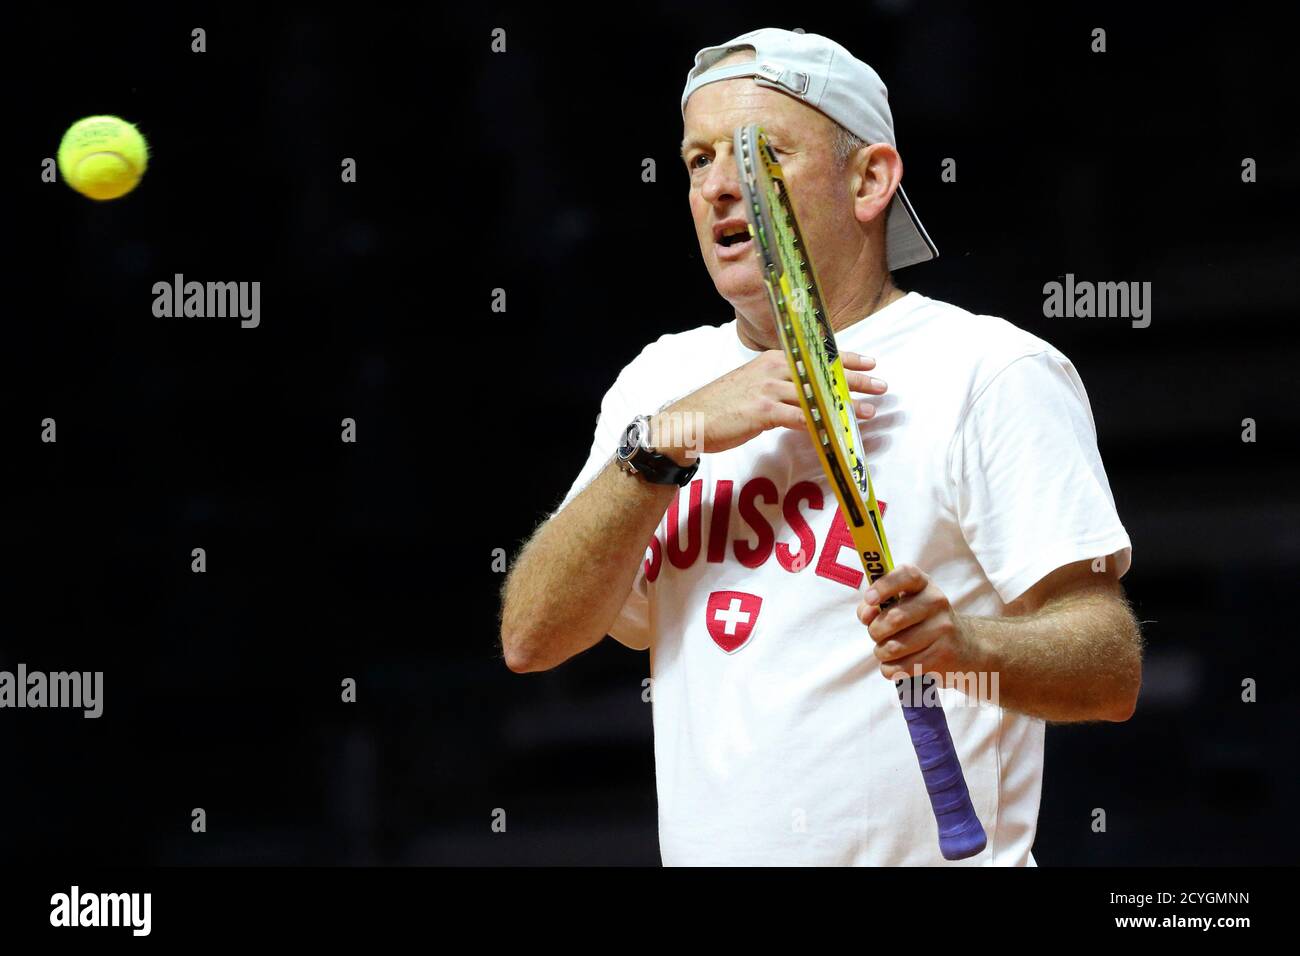 David McPherson coaches Switzerland's Davis Cup tennis team during a  training session at the Pierre Mauroy stadium in Villeneuve d'Ascq,  northern France, November 19, 2014. France will face Switzerland in their  Davis